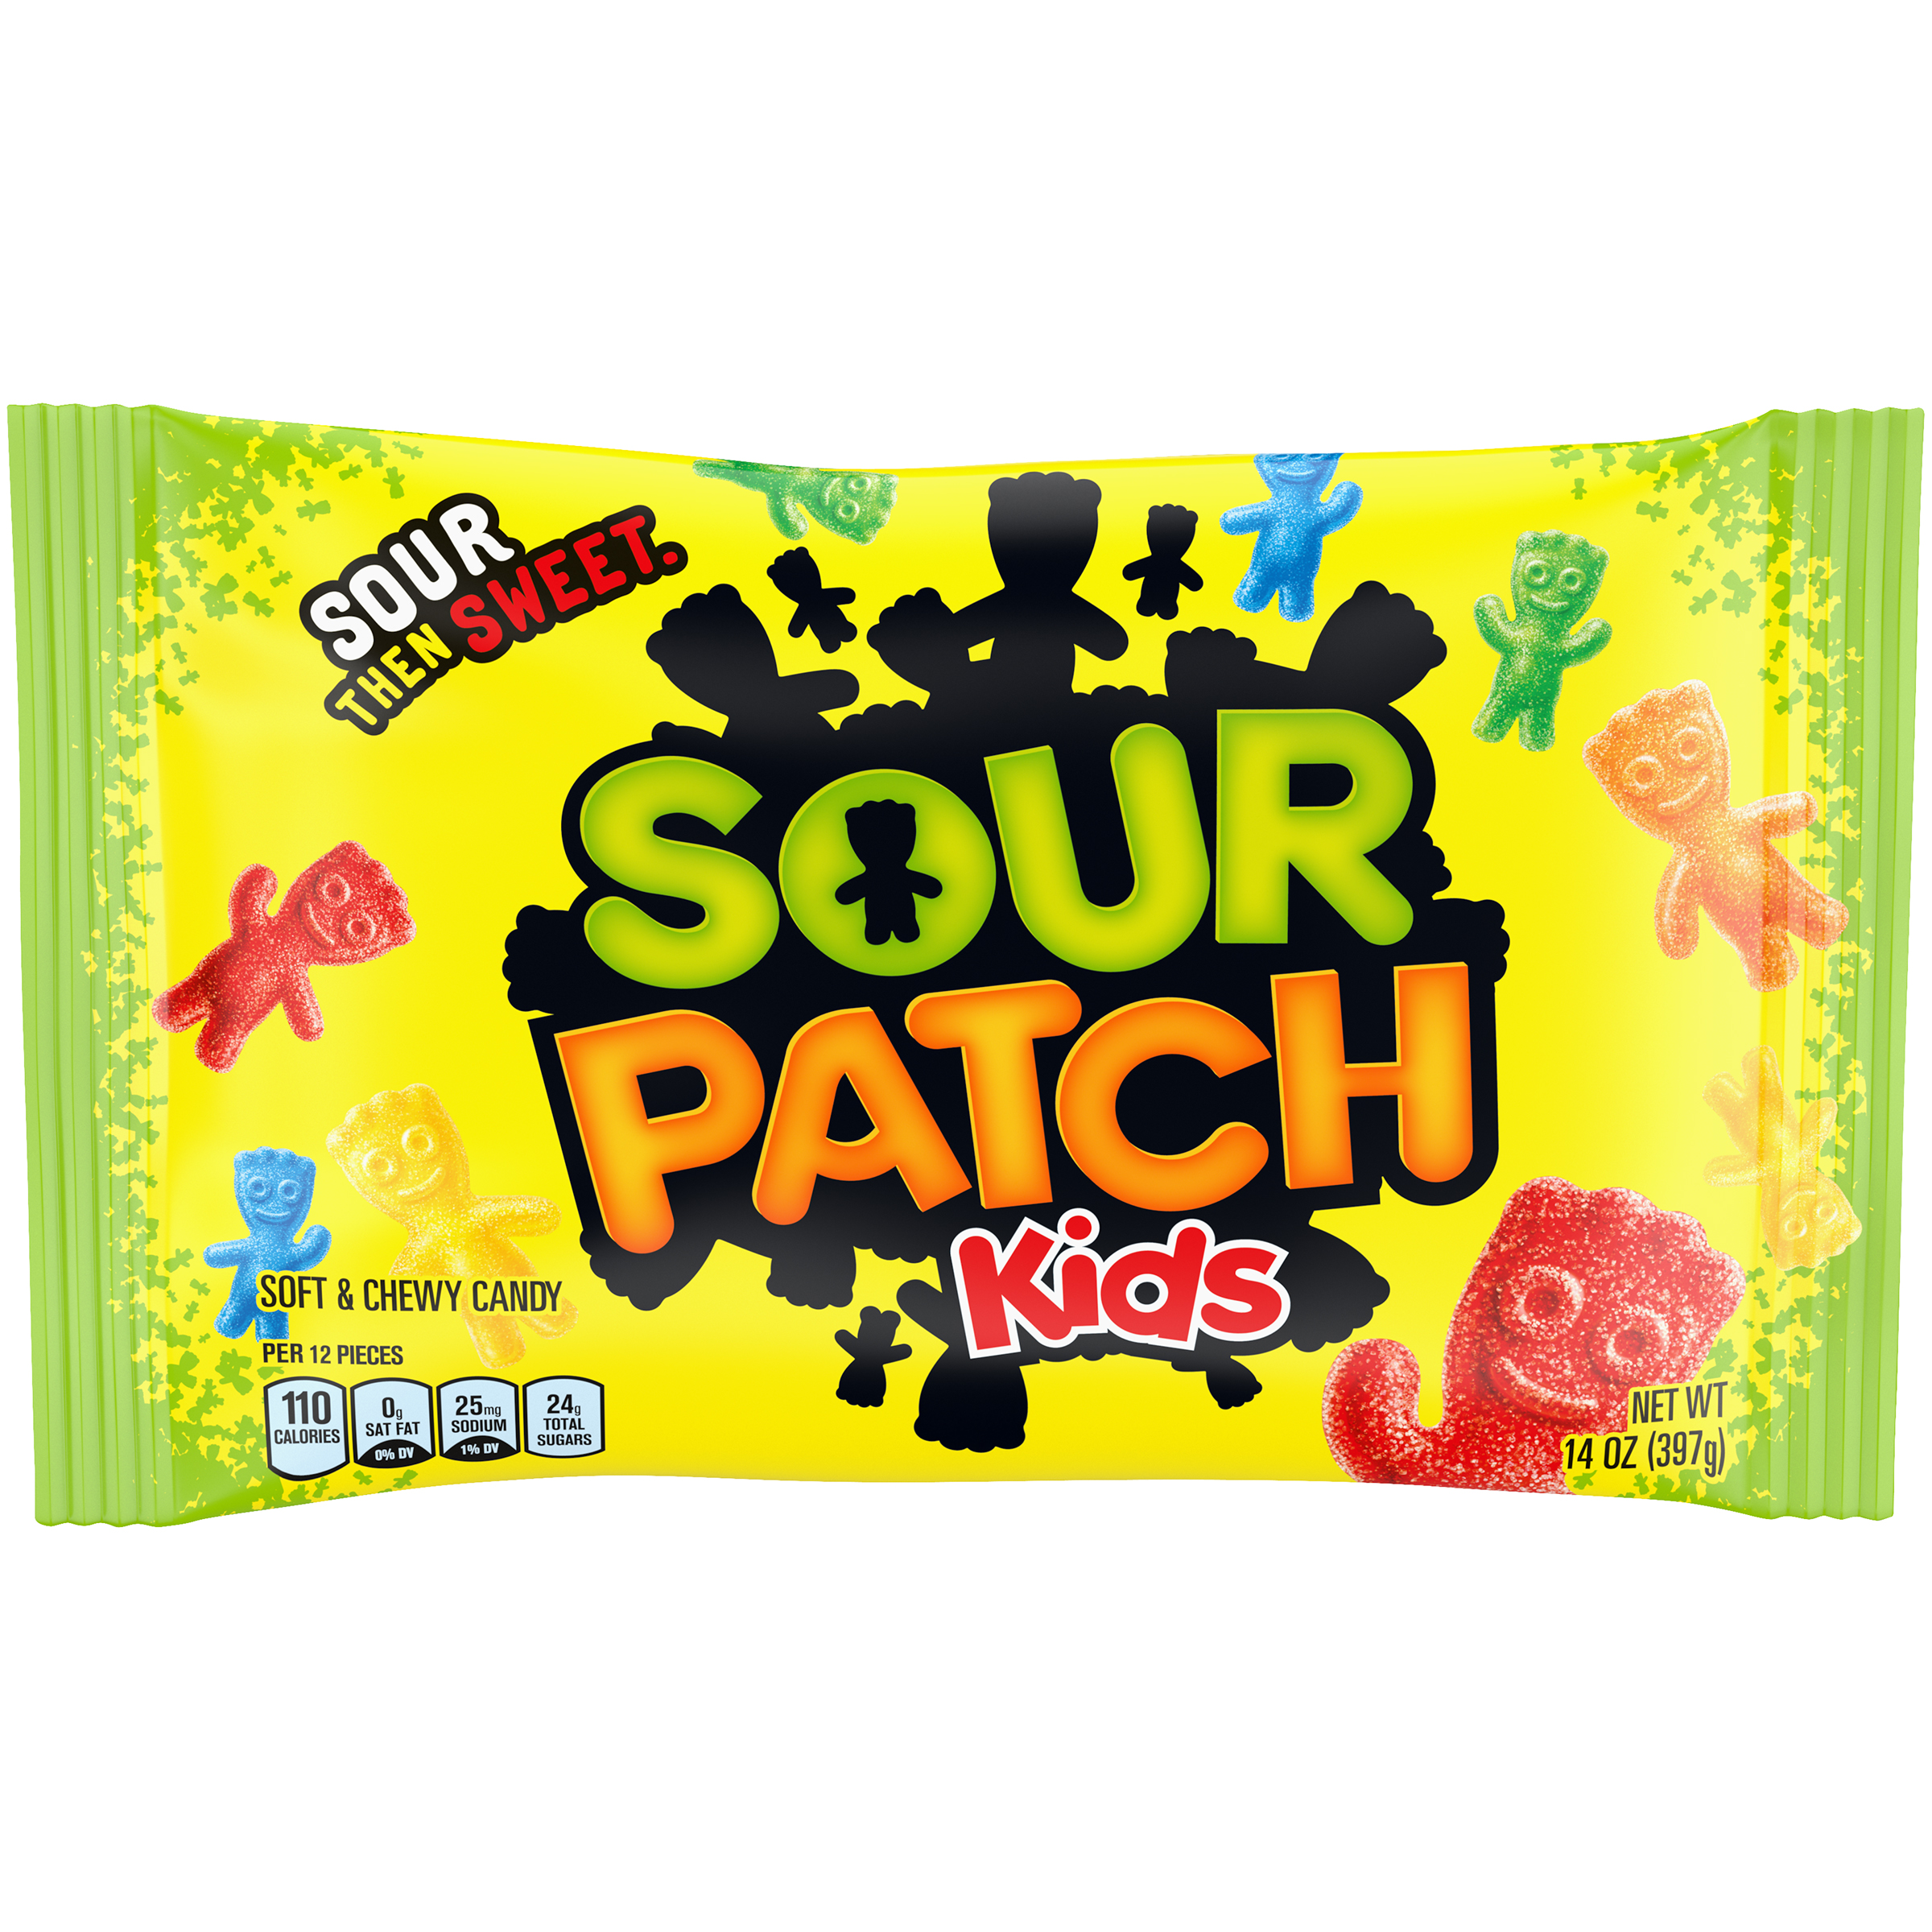 SOUR PATCH KIDS Soft & Chewy Candy, 12- 14oz Bags